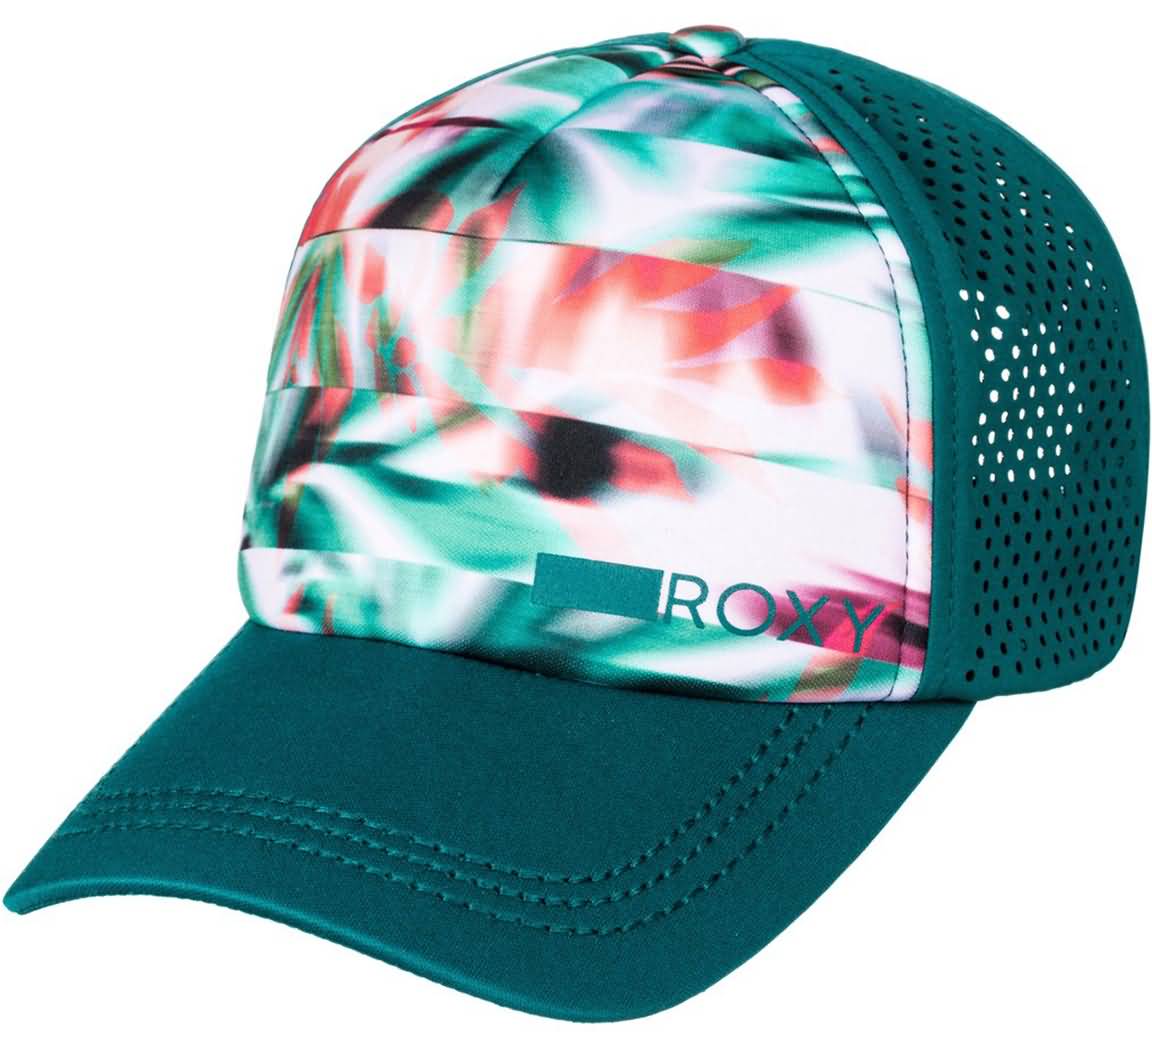 Roxy Fall 2017 Accessories | Womens Lifestyle Caps & Hats